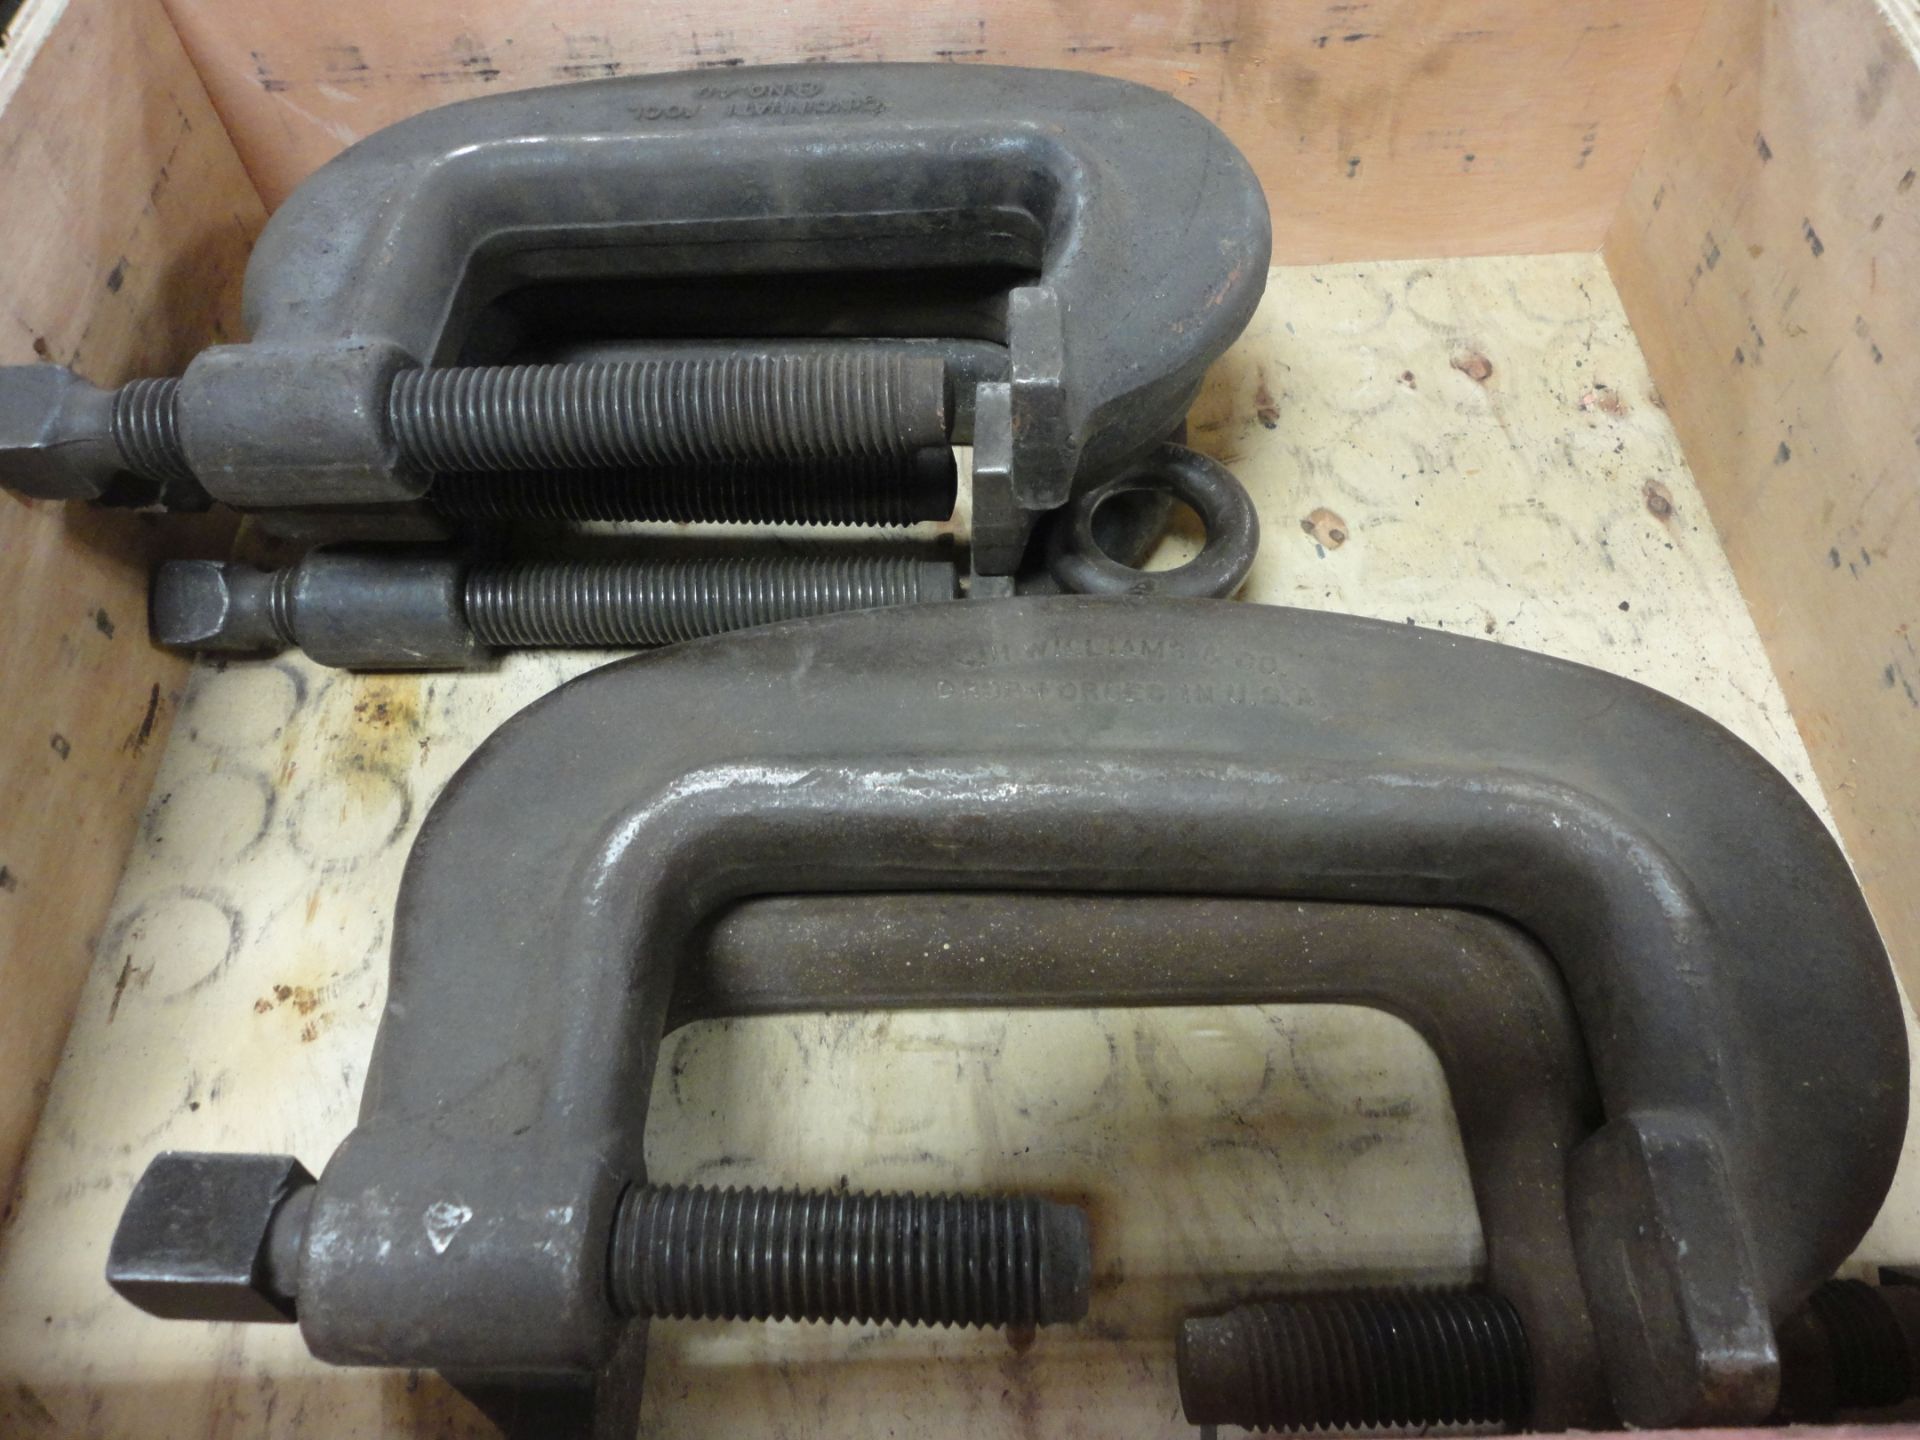 (2) 8" AND (3) 6" HEAVY DUTY SERVICE CLAMPS